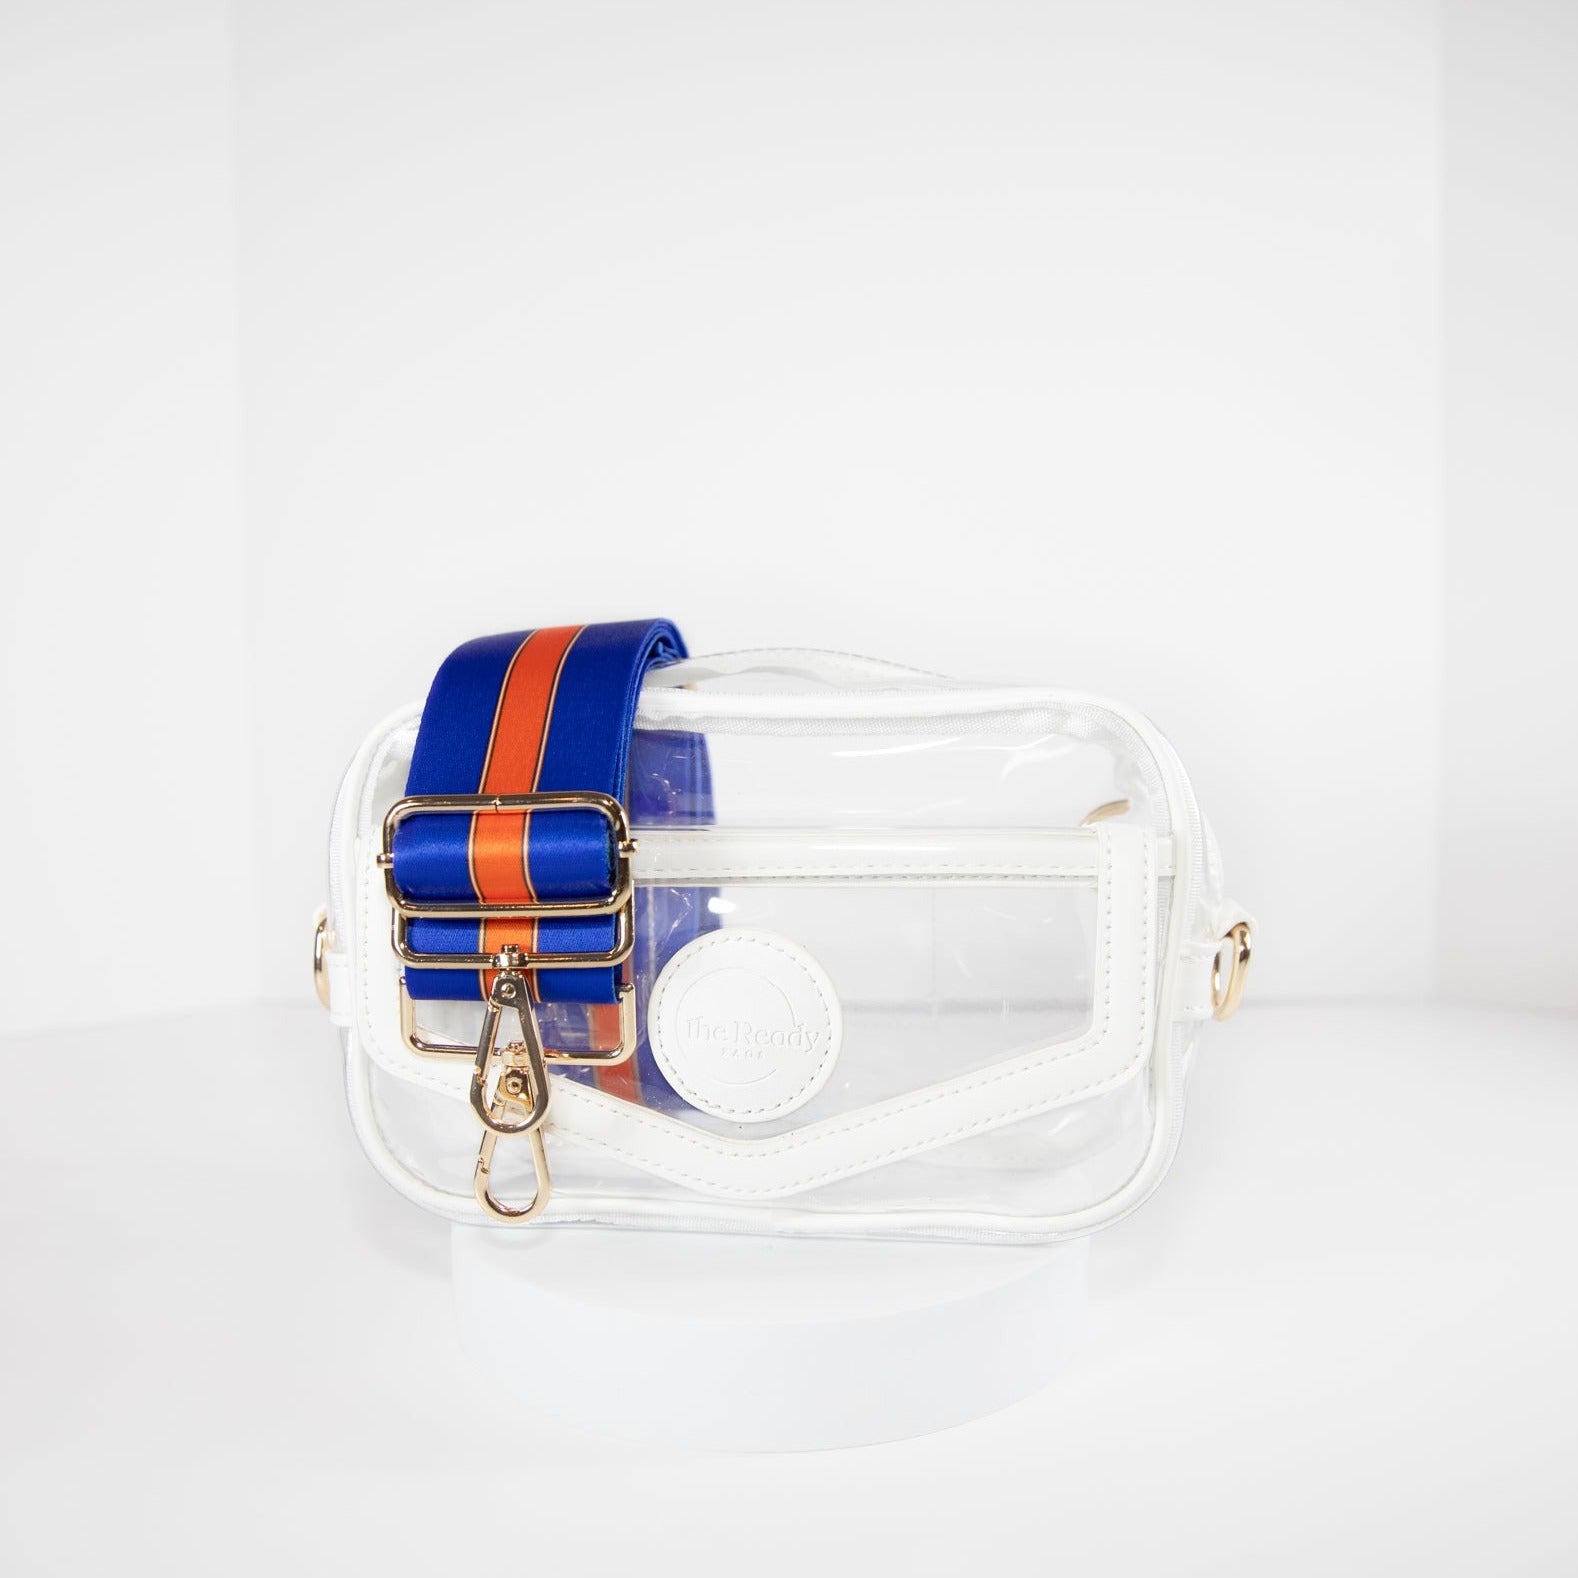 Clear stadium bag in white leather trim, front facing, with a crossbody strap in University of Florida Gators team colors.